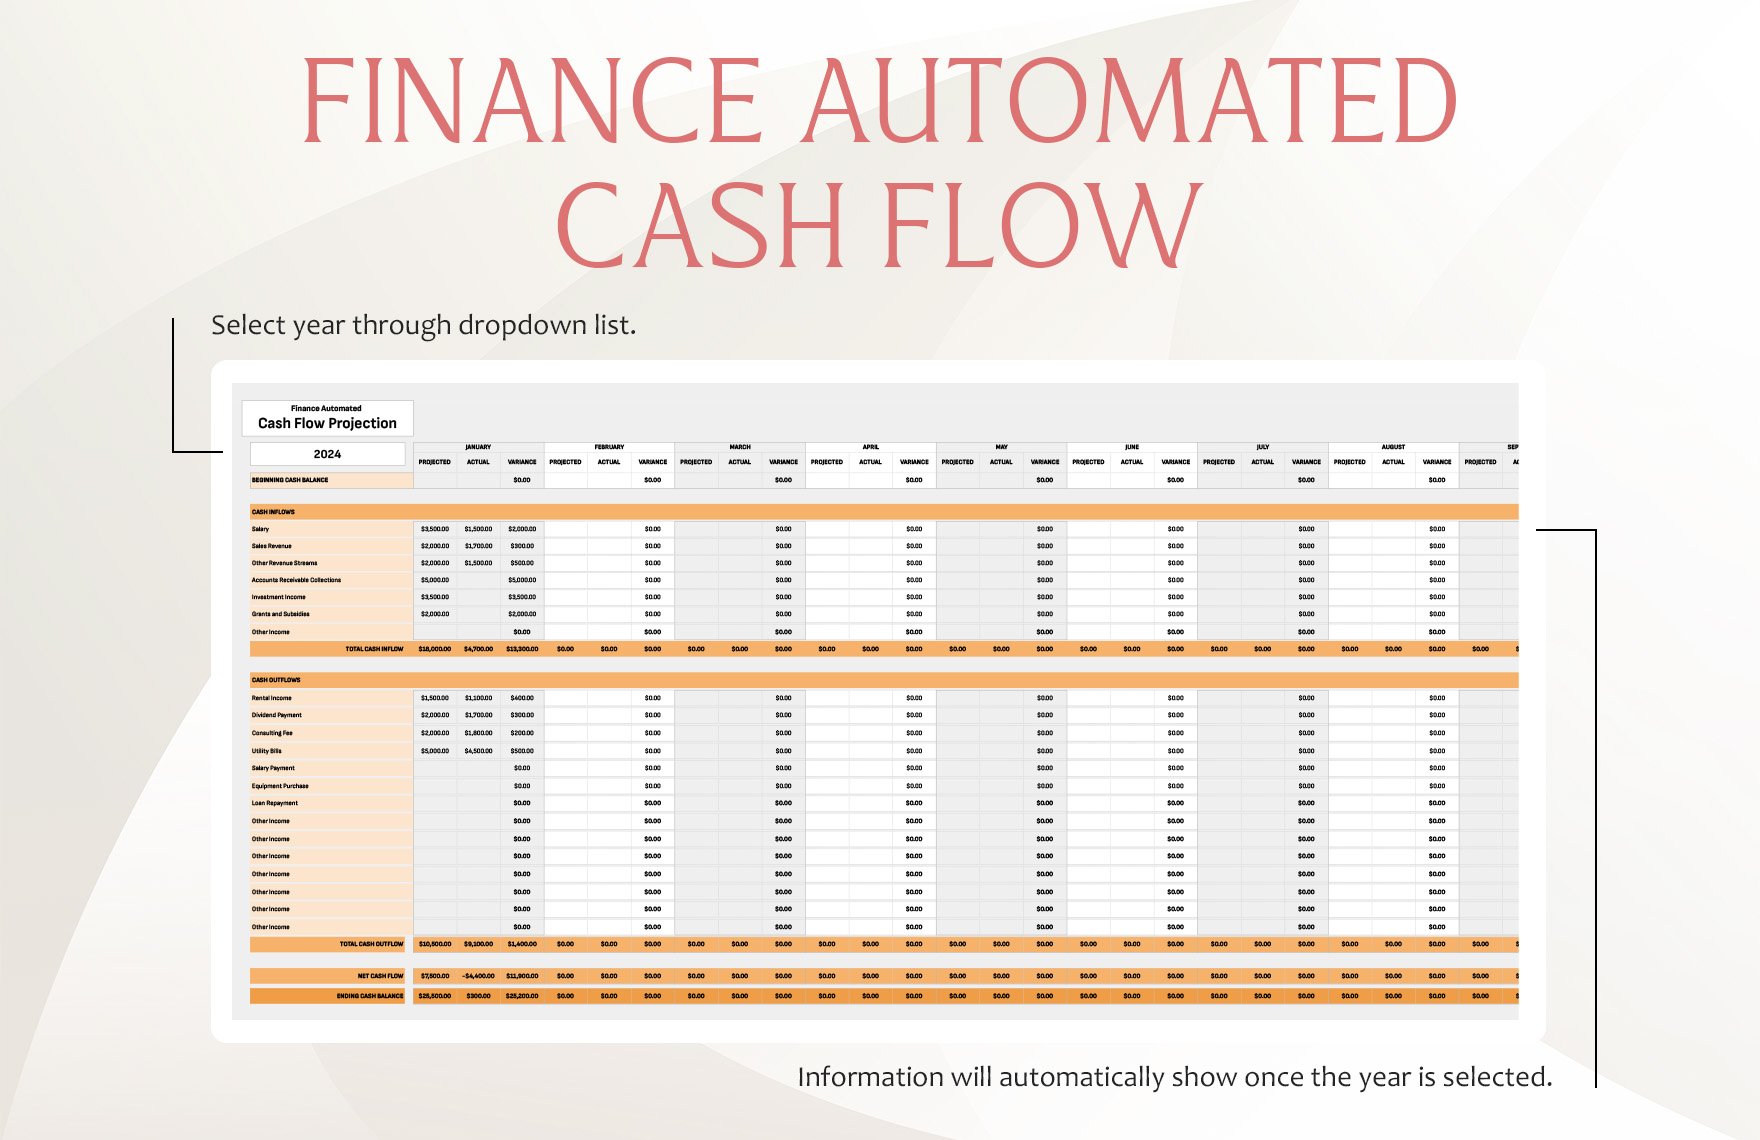 Finance Automated Cash Flow Projection Template